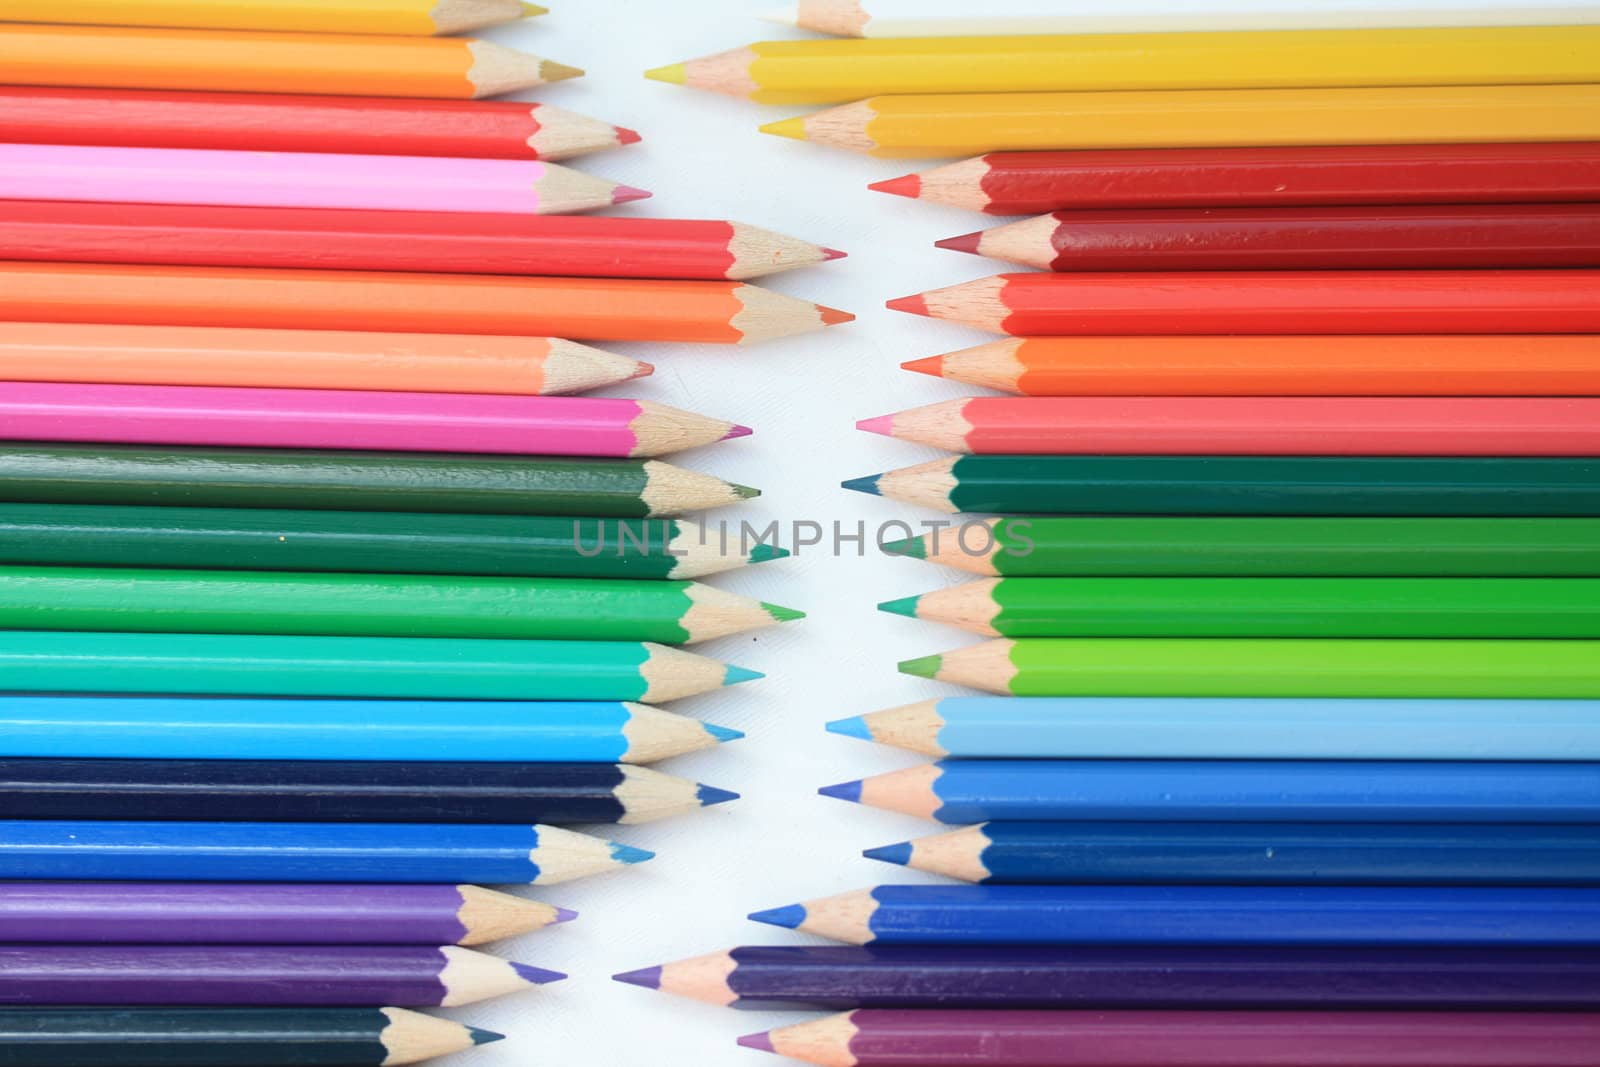 brand new sharp and unused color pencils